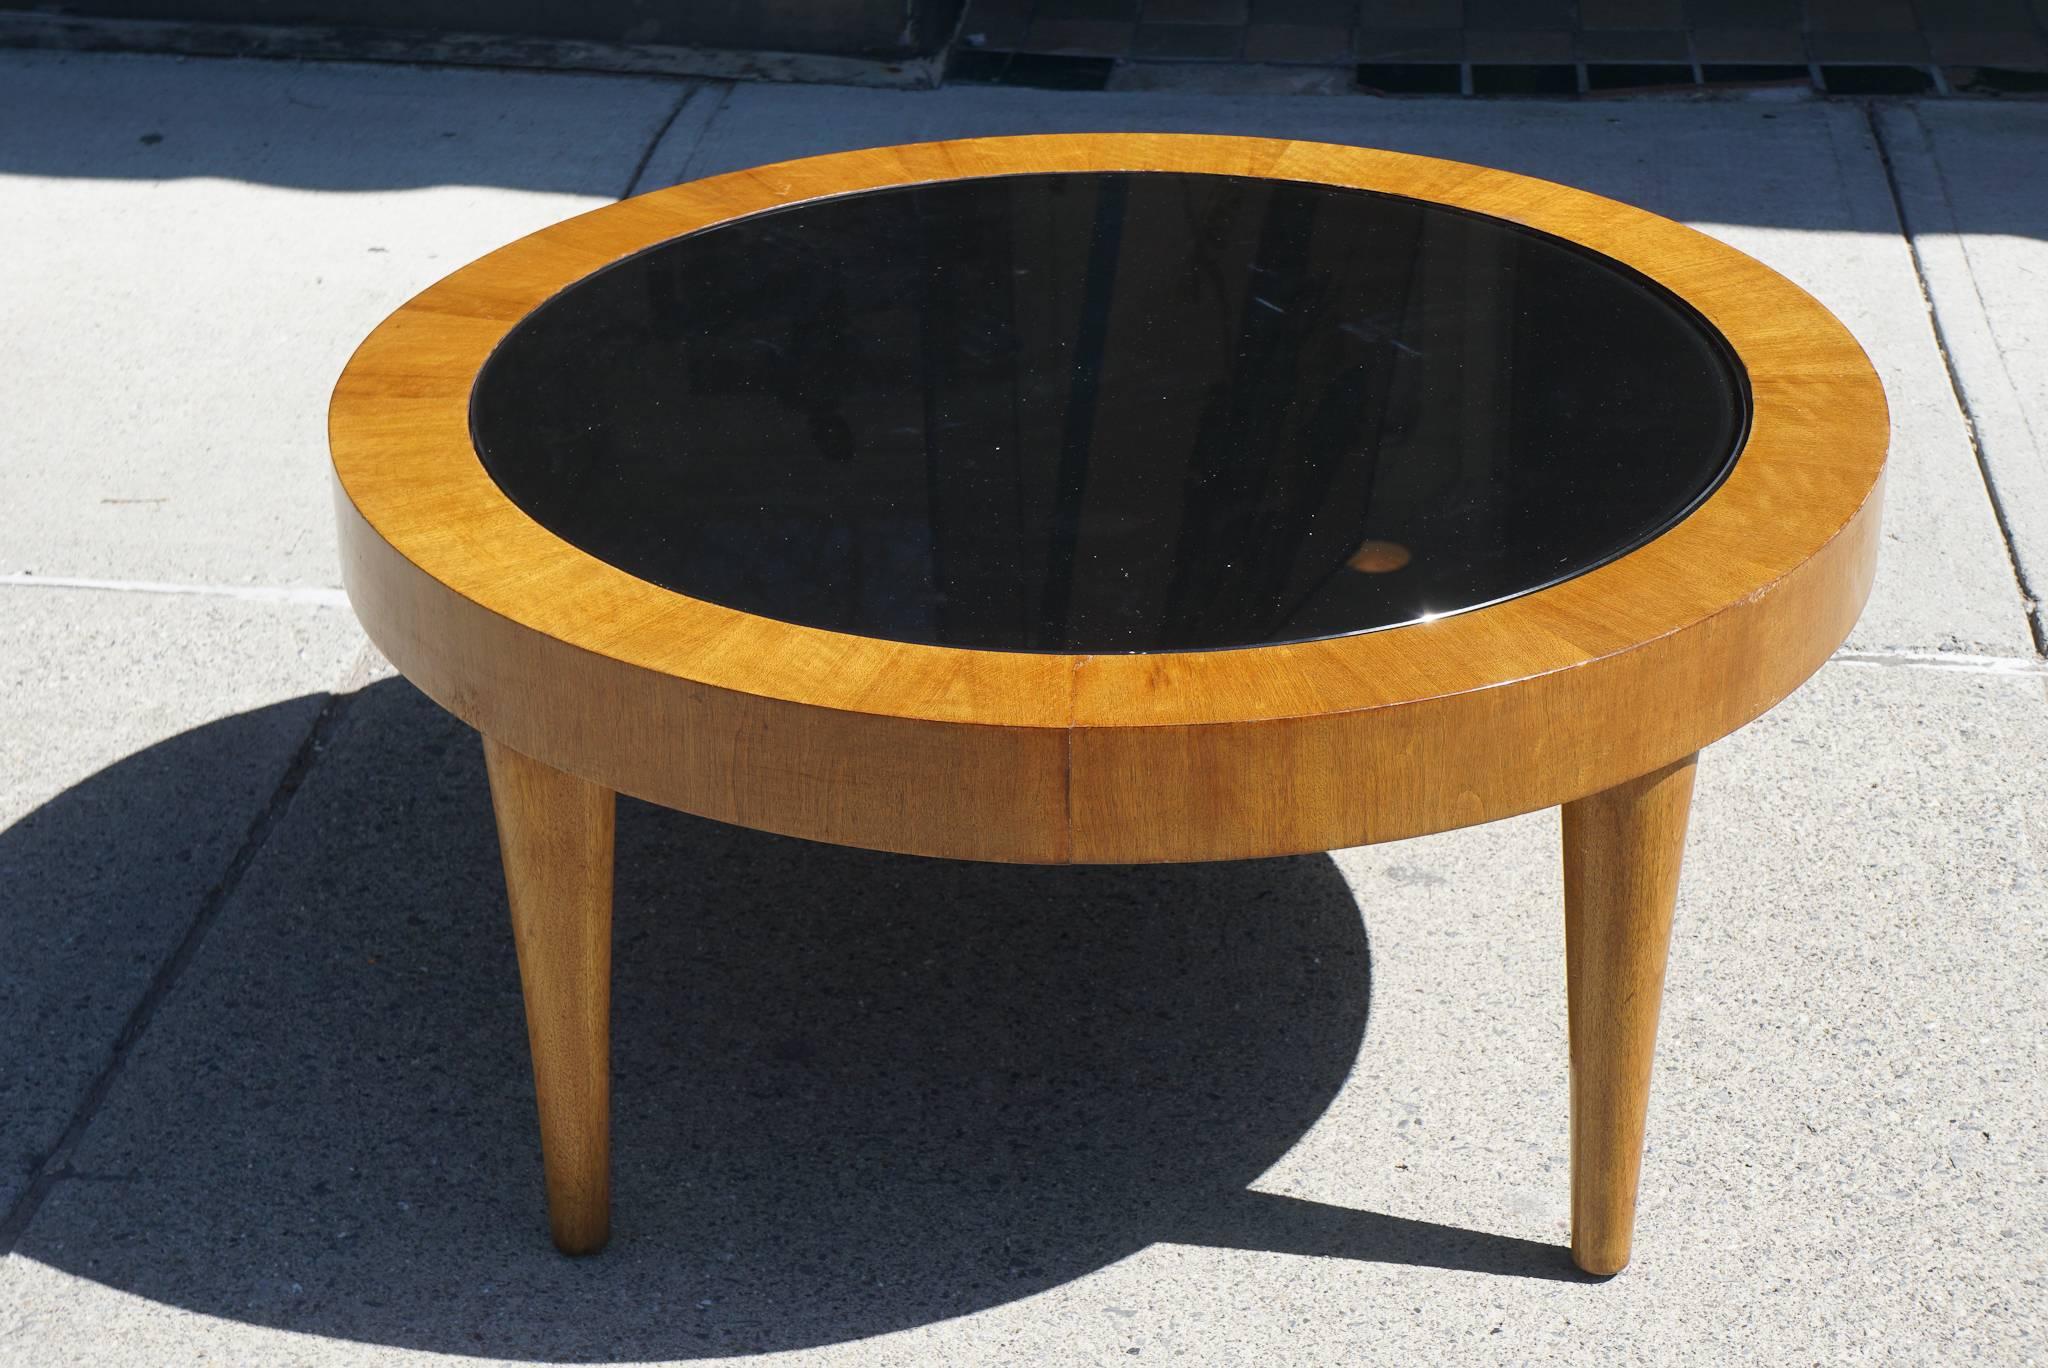 This modern vintage 1940s walnut coffee table is centered on a black glass top creating a dynamic play of light and dark contrasts. The wood grains are well-chosen to conform to the shape of the table creating a subtle play of lines. While simple in